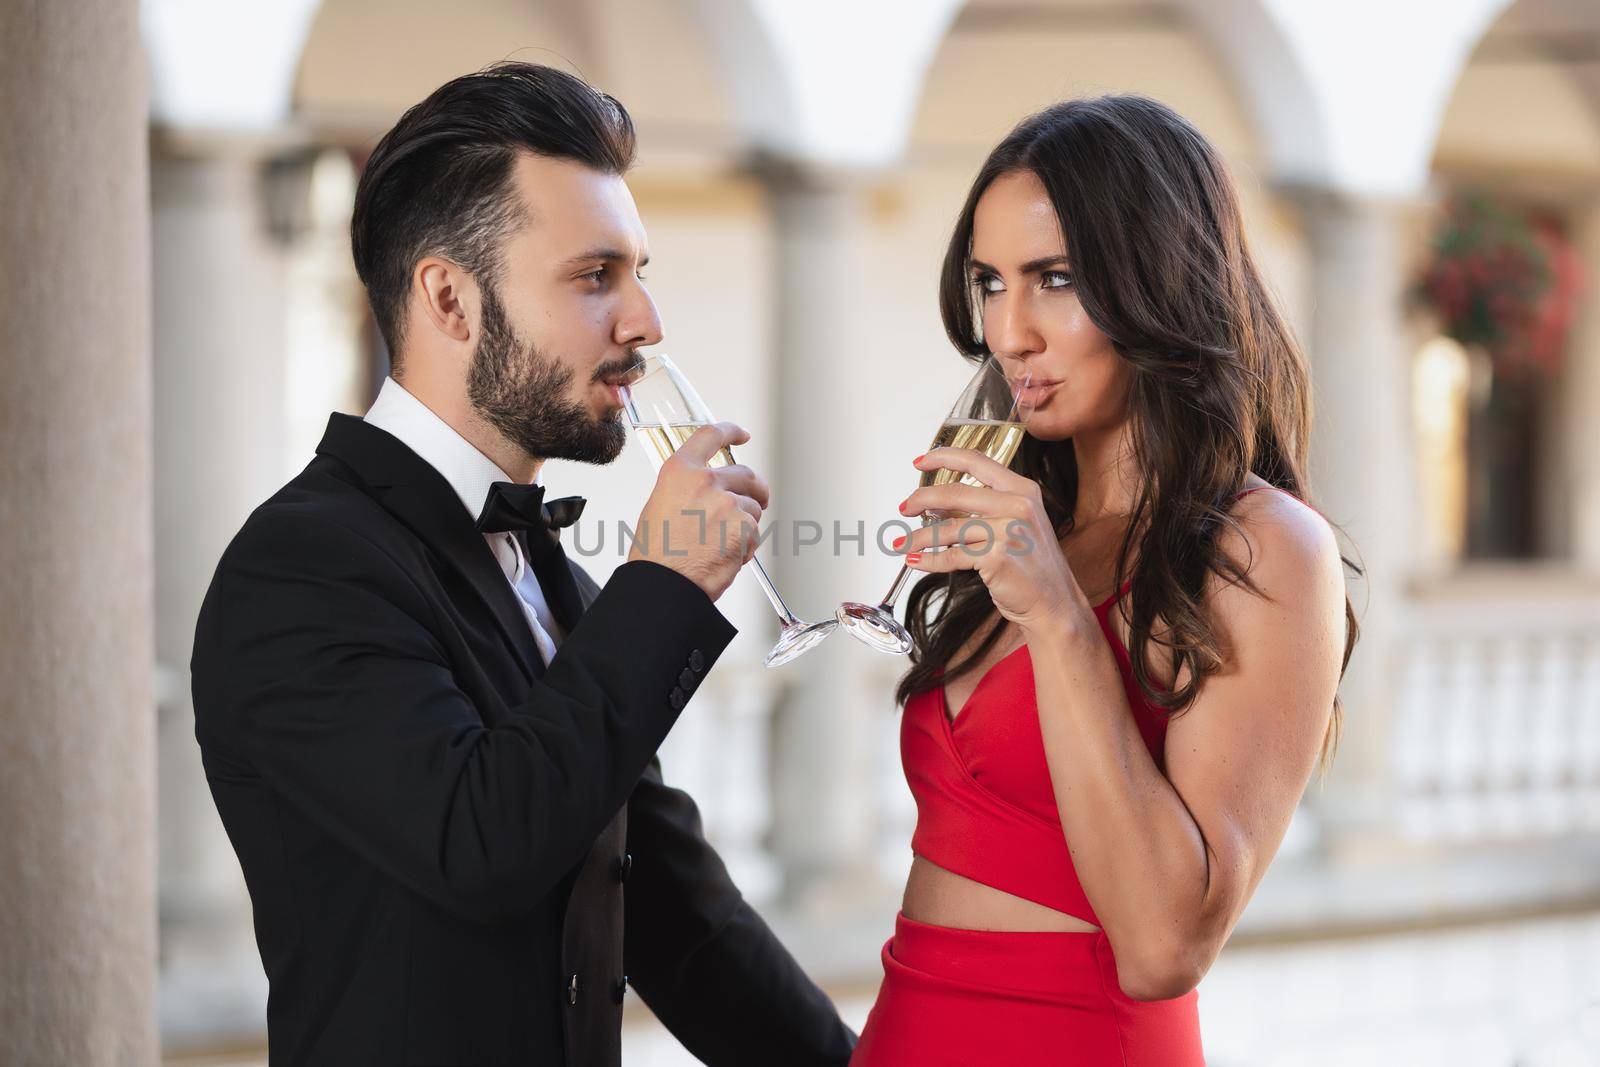 Couple drinking champagne by wdnet_studio